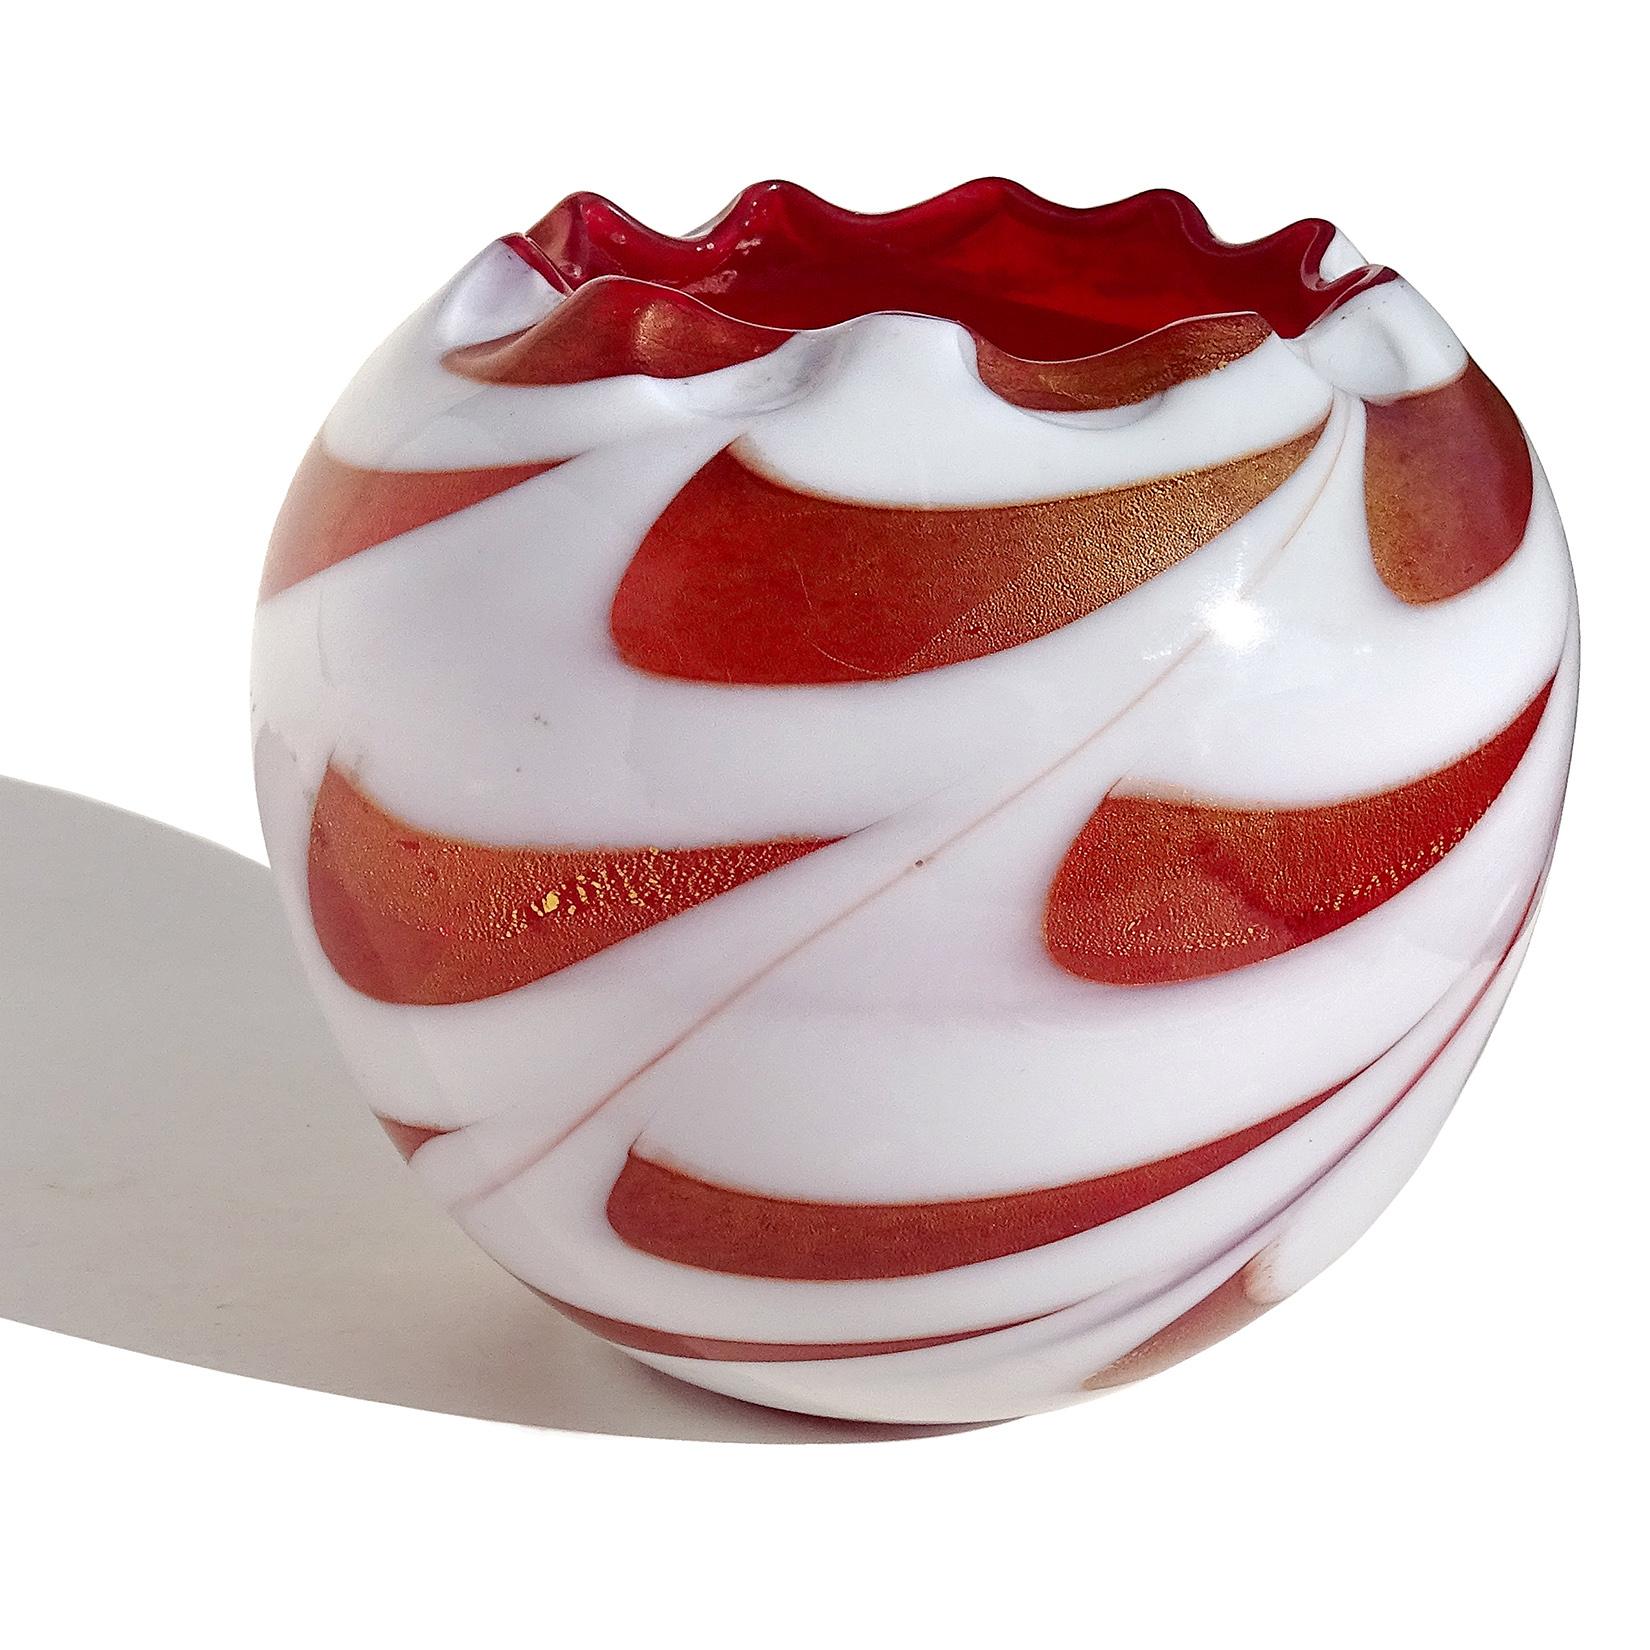 Beautiful vintage Murano hand blown red, white and gold flecks Italian art glass pulled feather rose bowl flower vase. It has heavy gold leaf on the open red sections. Created in an older Venetian style. The piece is almost a perfect ball, with